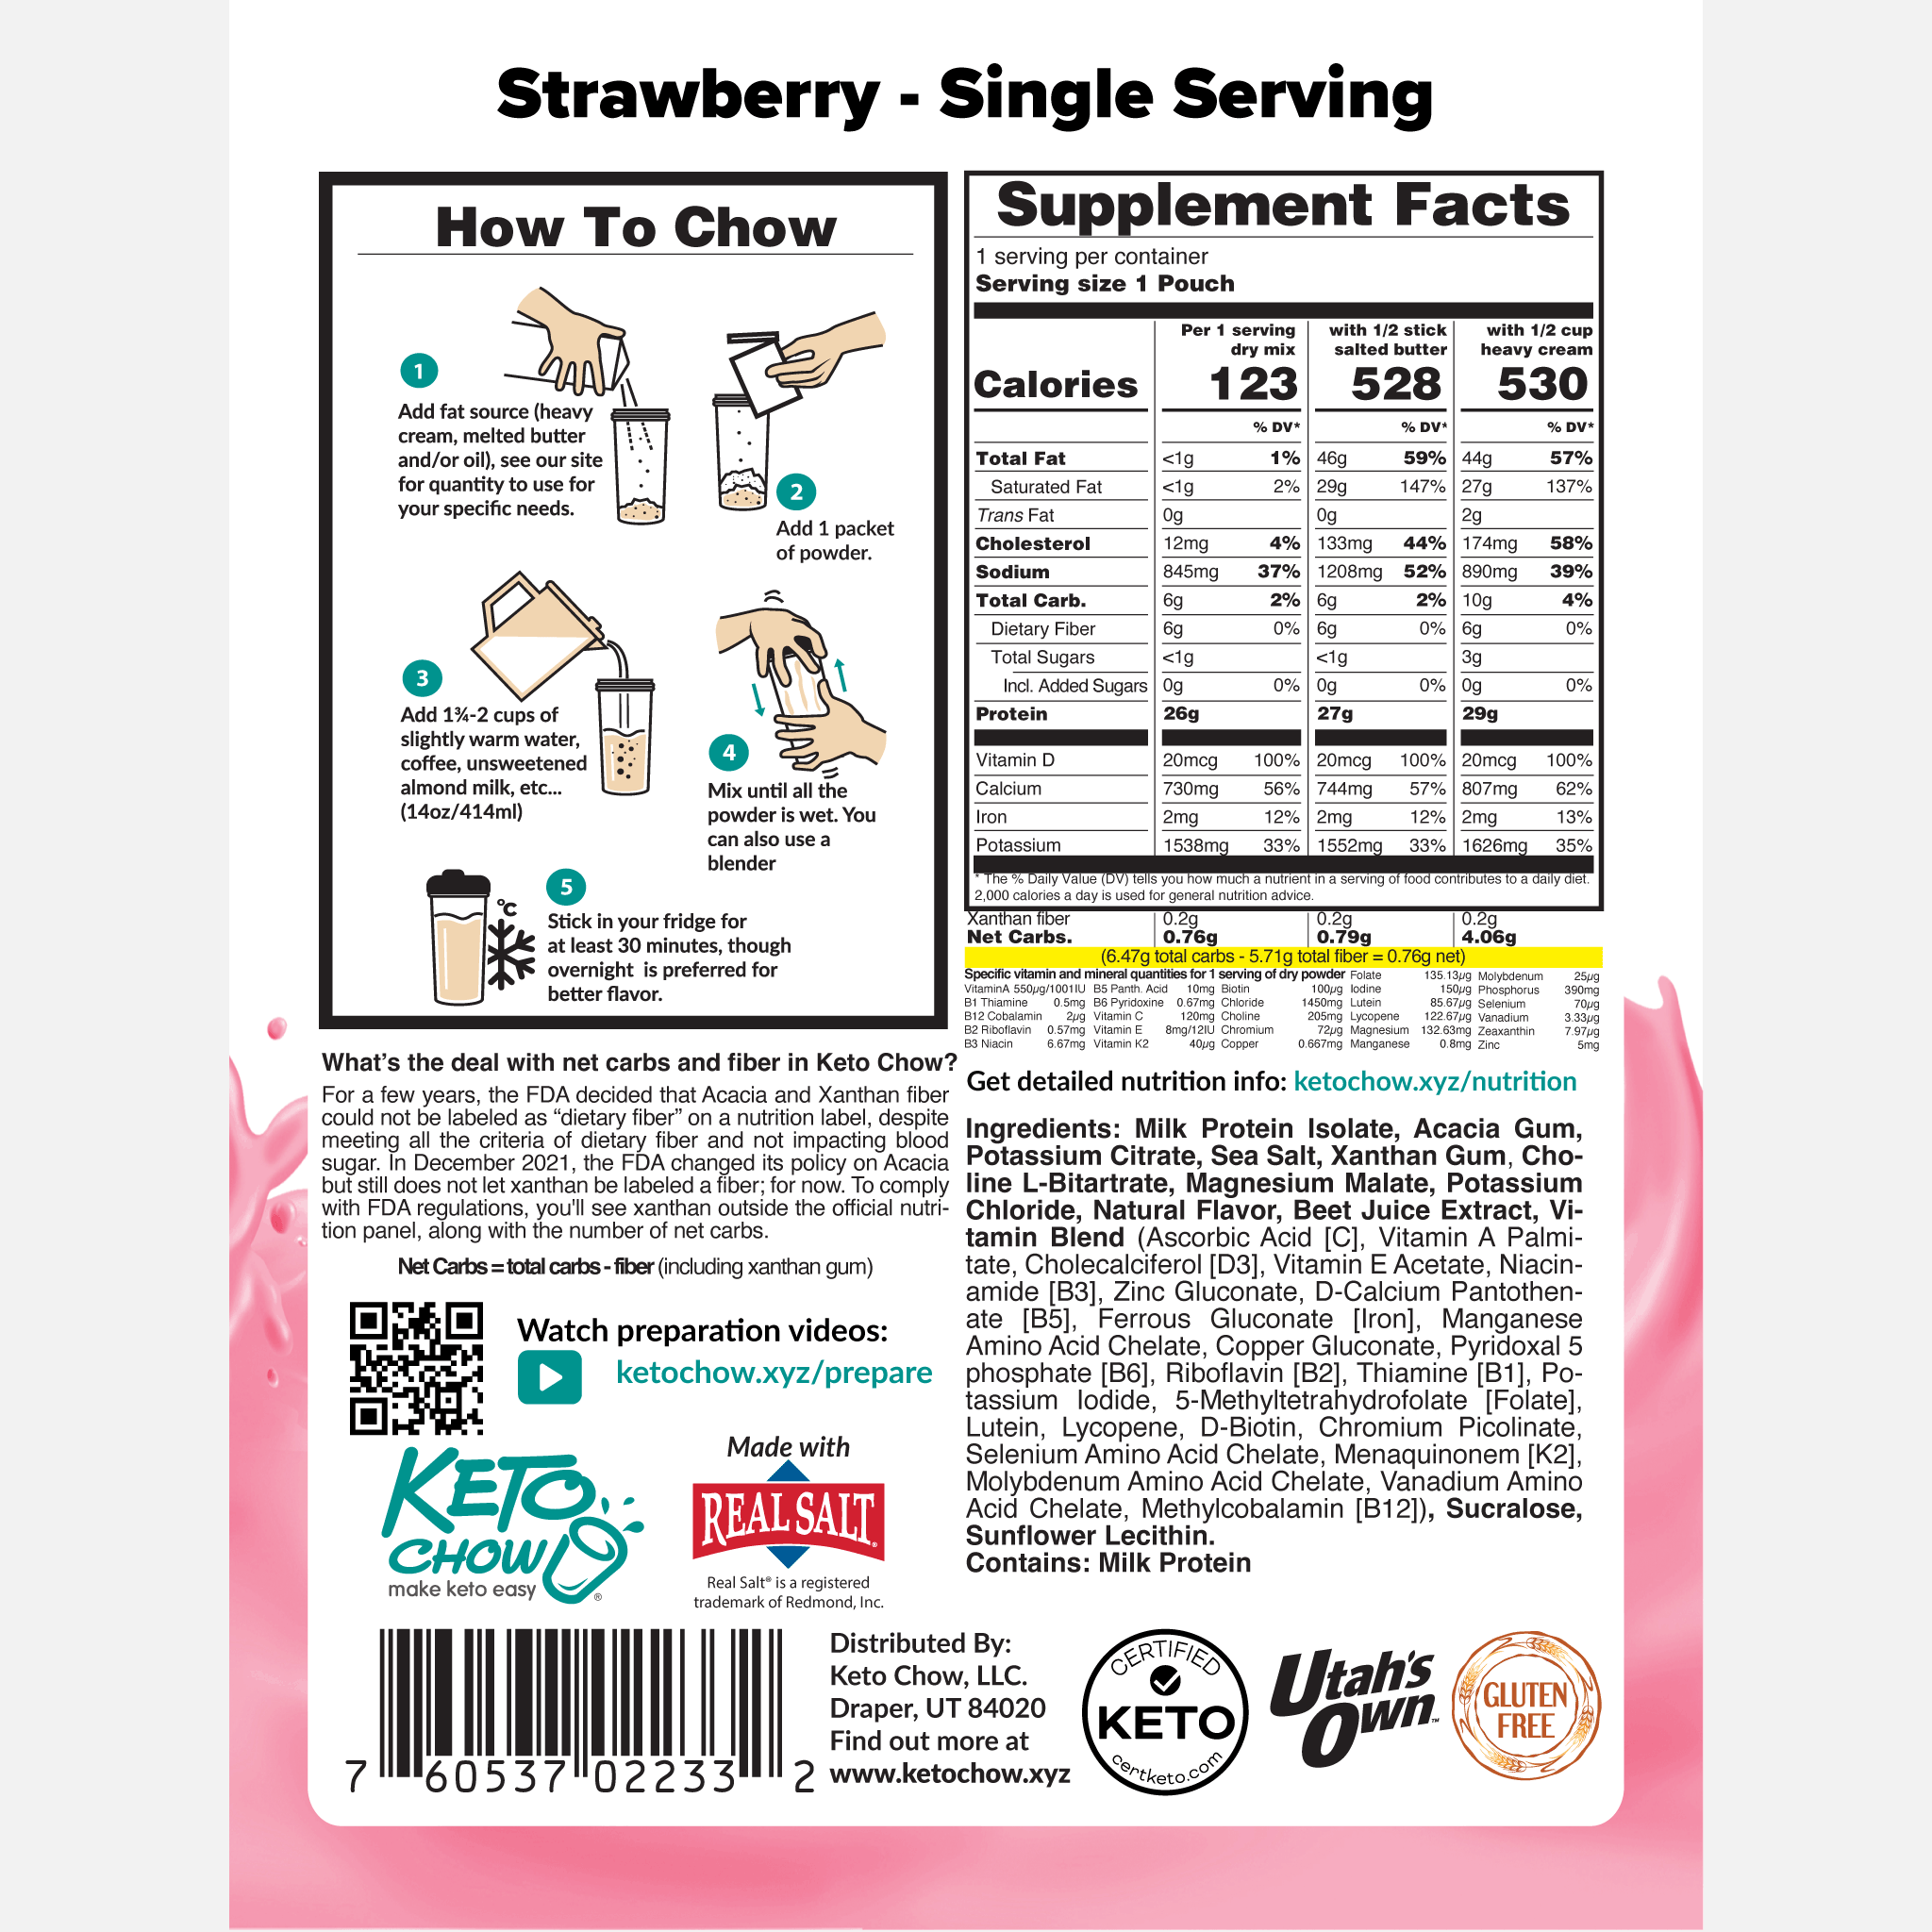 Strawberry Keto Chow package back